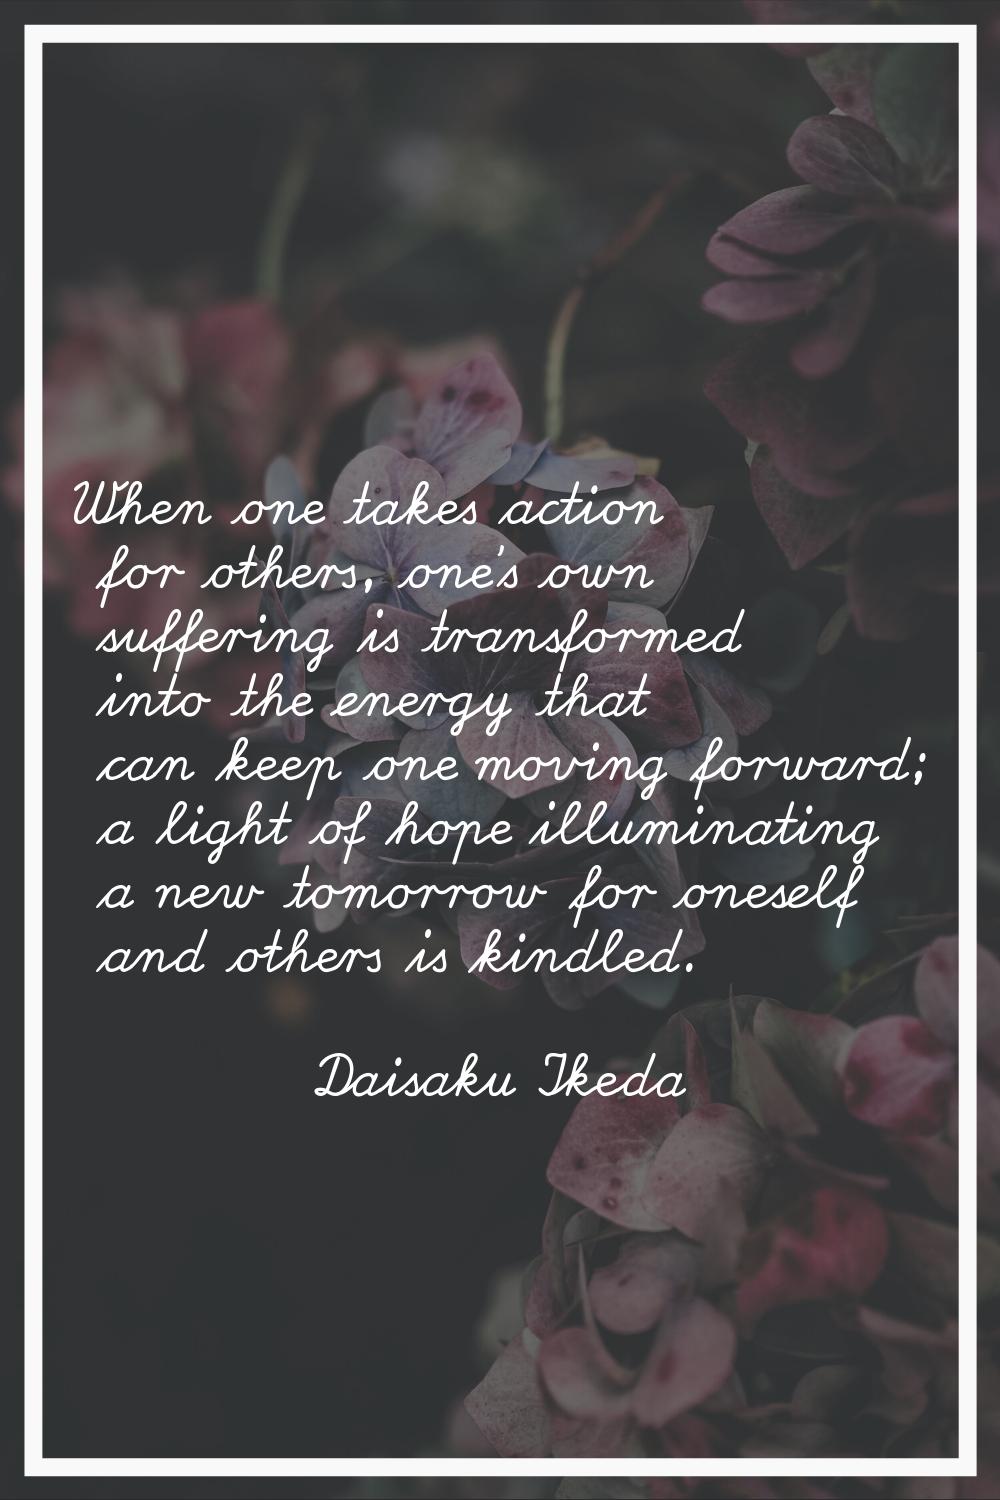 When one takes action for others, one's own suffering is transformed into the energy that can keep 